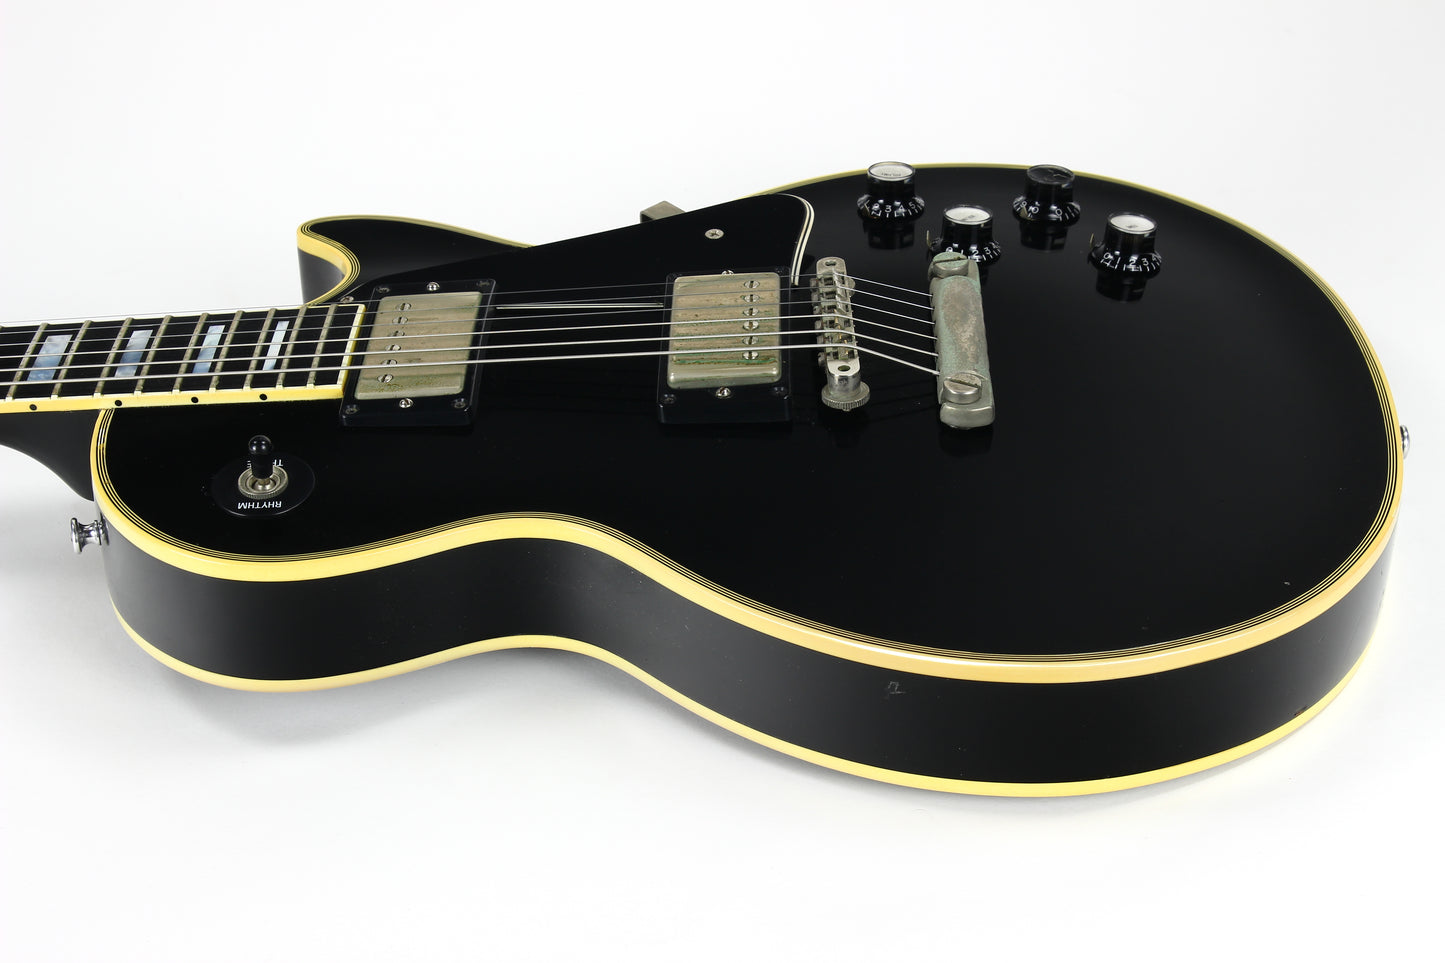 2002 Gibson '68 Les Paul Custom Black Beauty 1968 with Nickel Hardware Electric Guitar